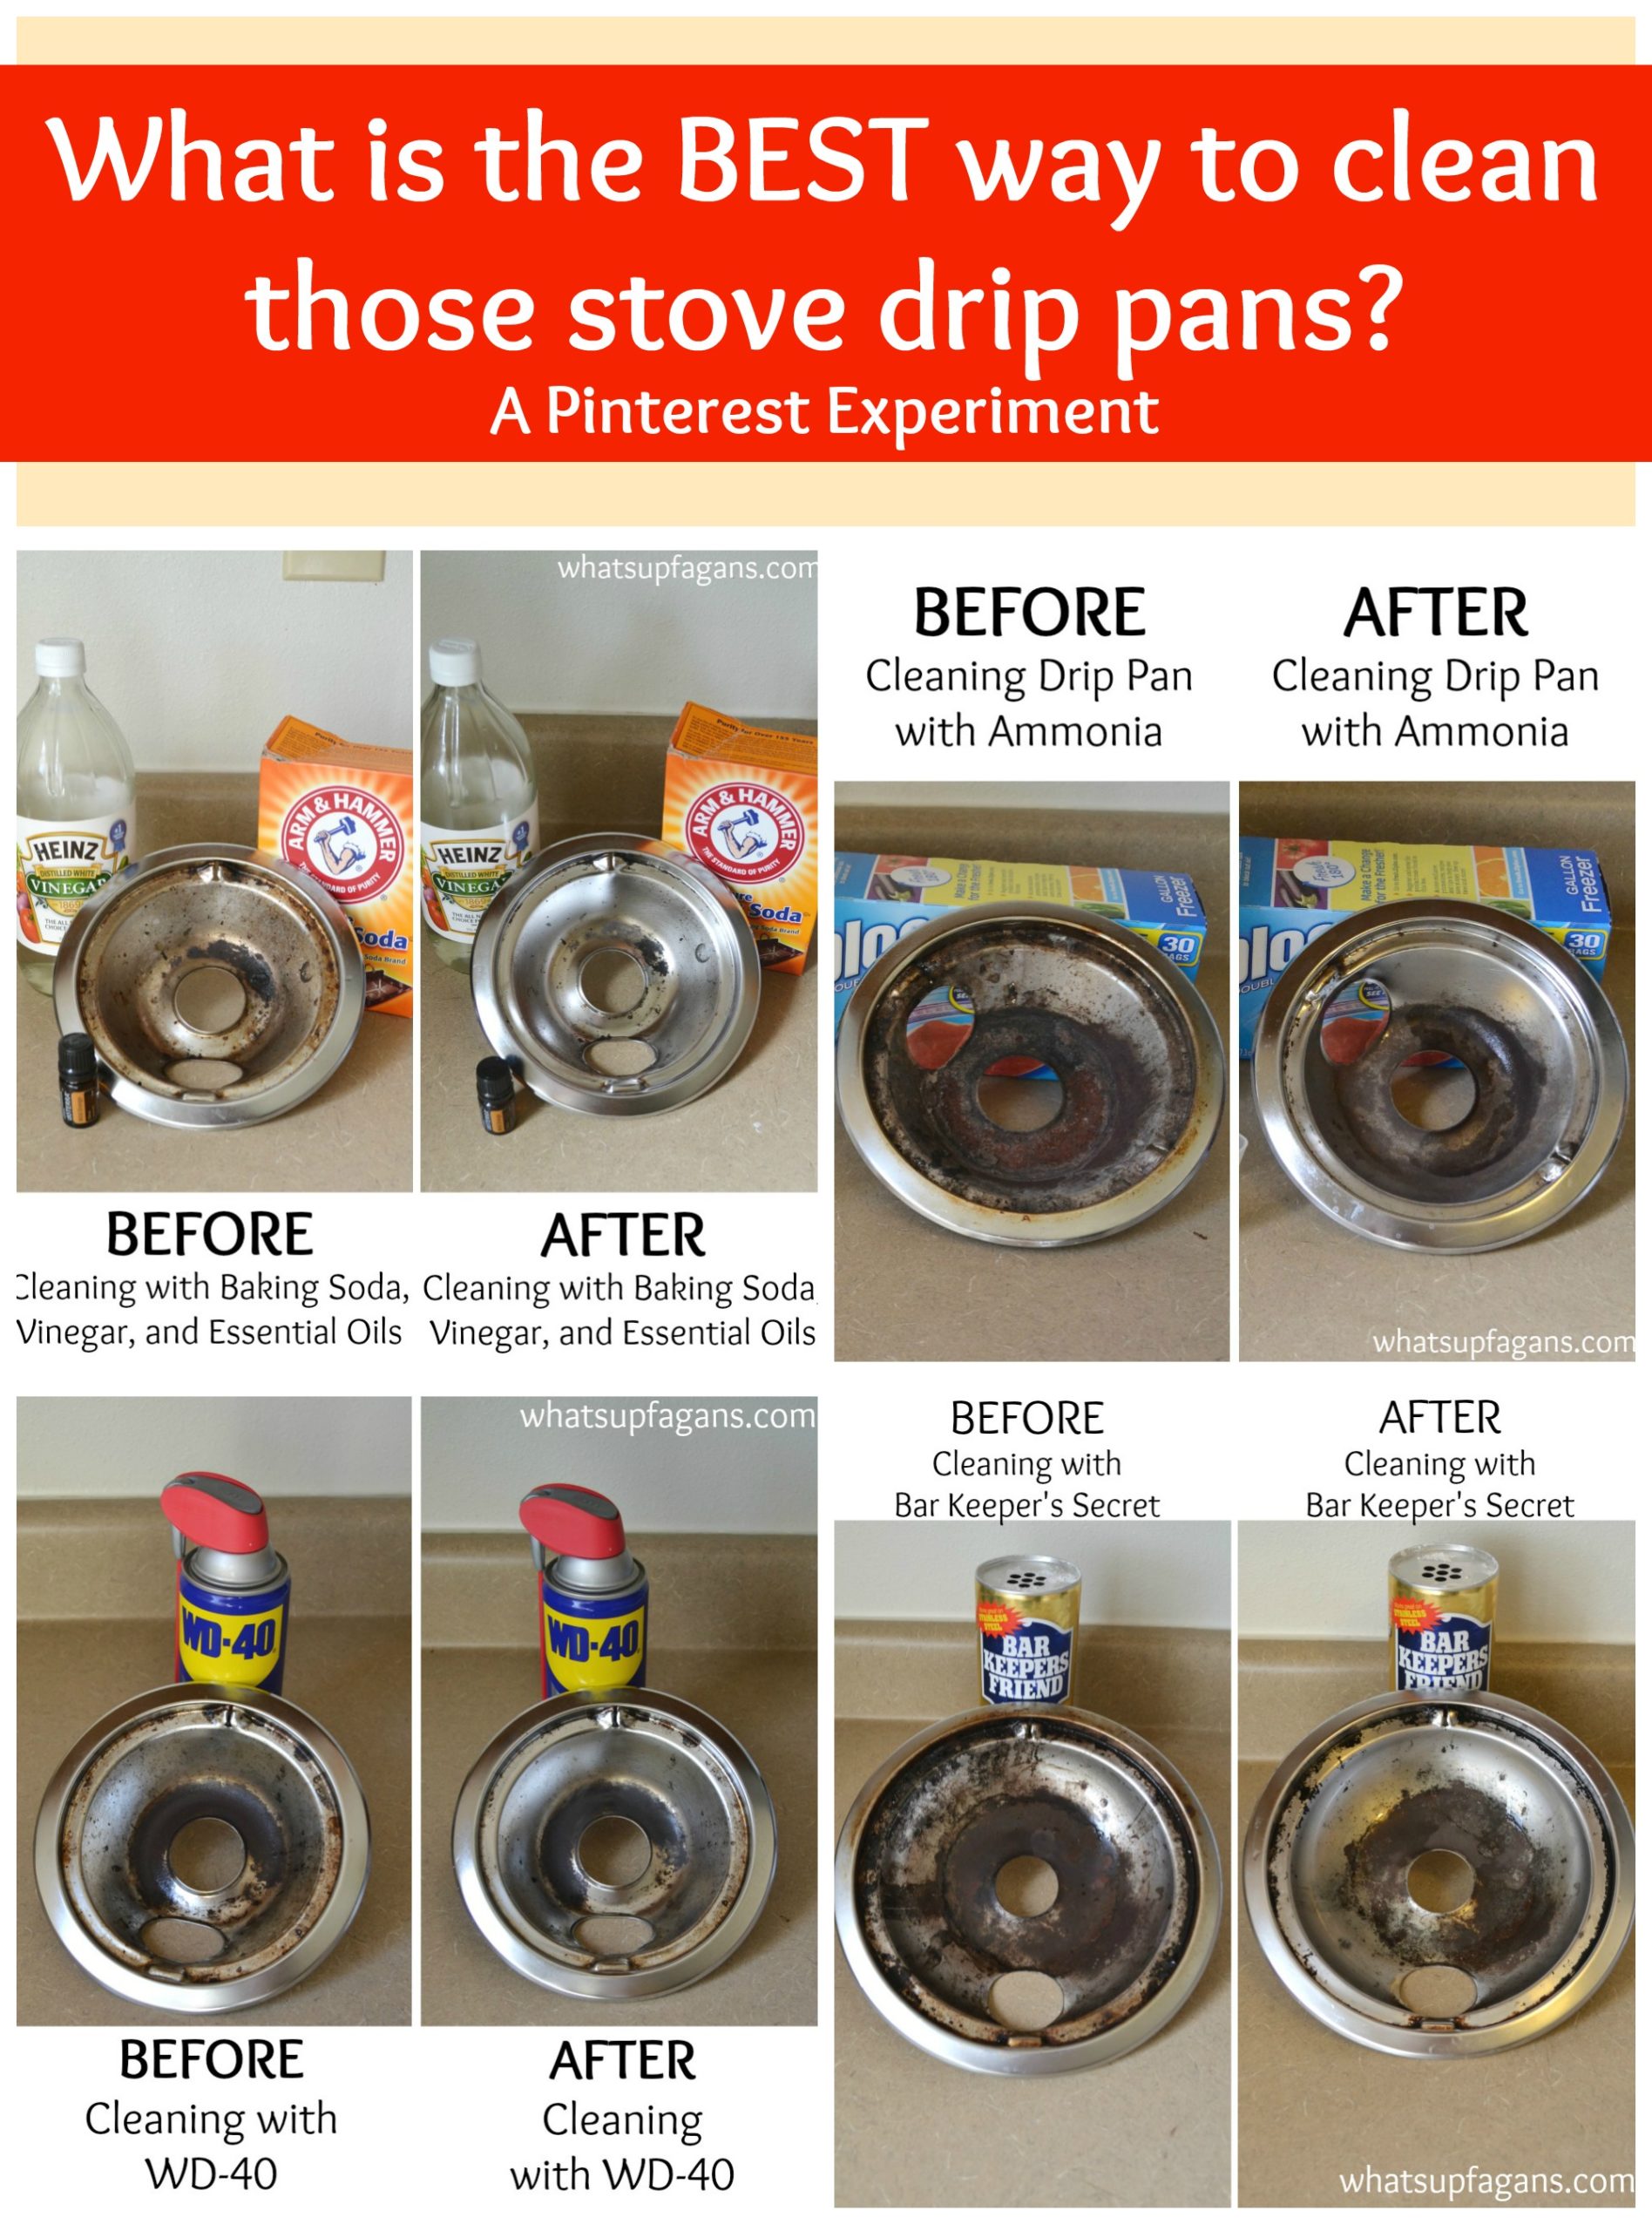 Everything You Wanted to Know About How to Clean Stove Drip Pans